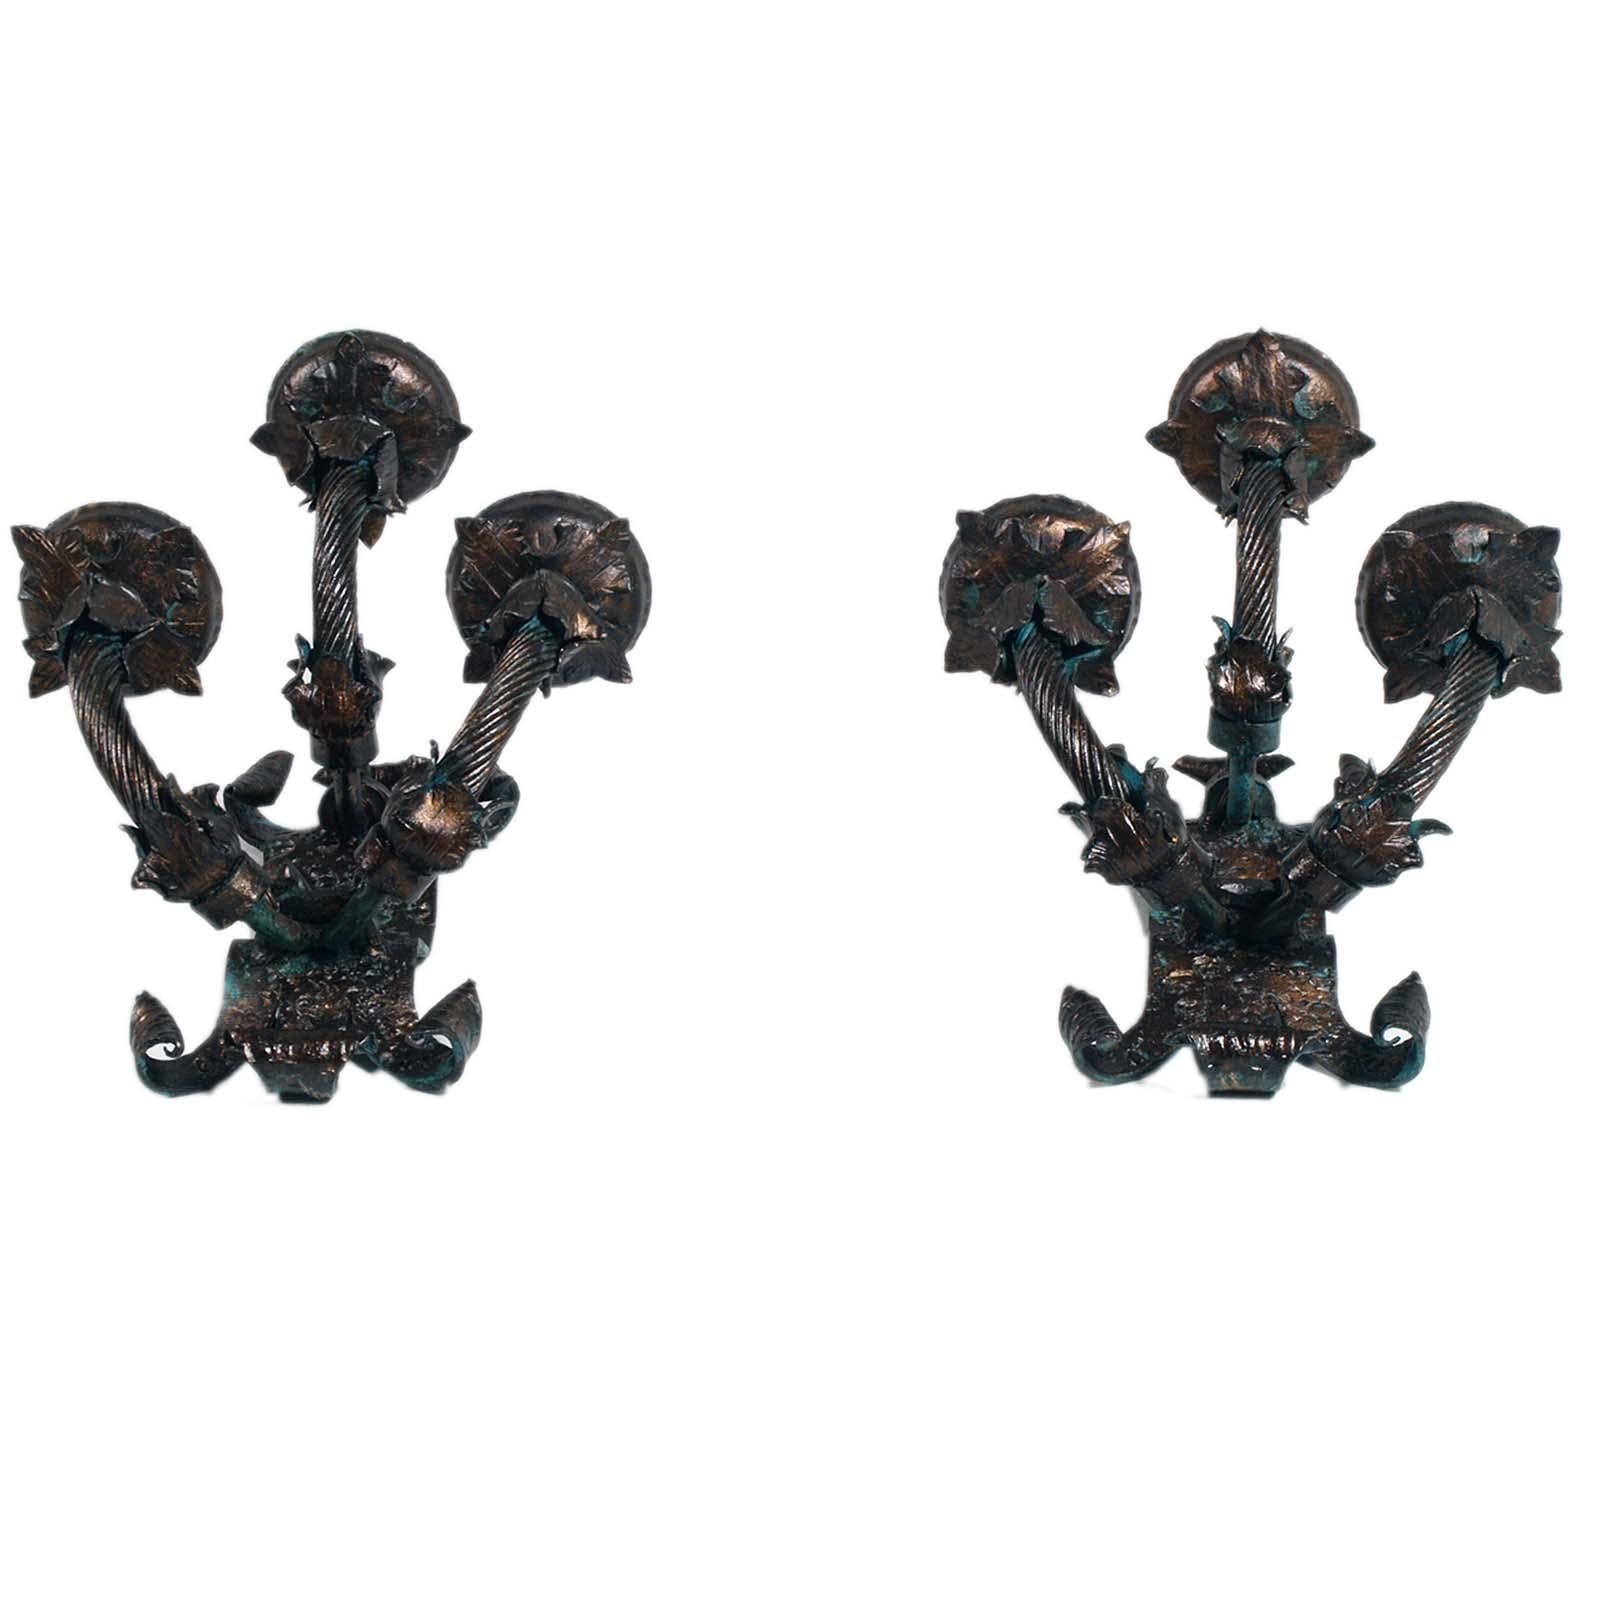 Superb antique pair of Tuscan Renaissance outdoor wall lights in gold-green patinated wrought iron, with engravings, leaves and twisted arms. With 3 lamp holders facing upwards